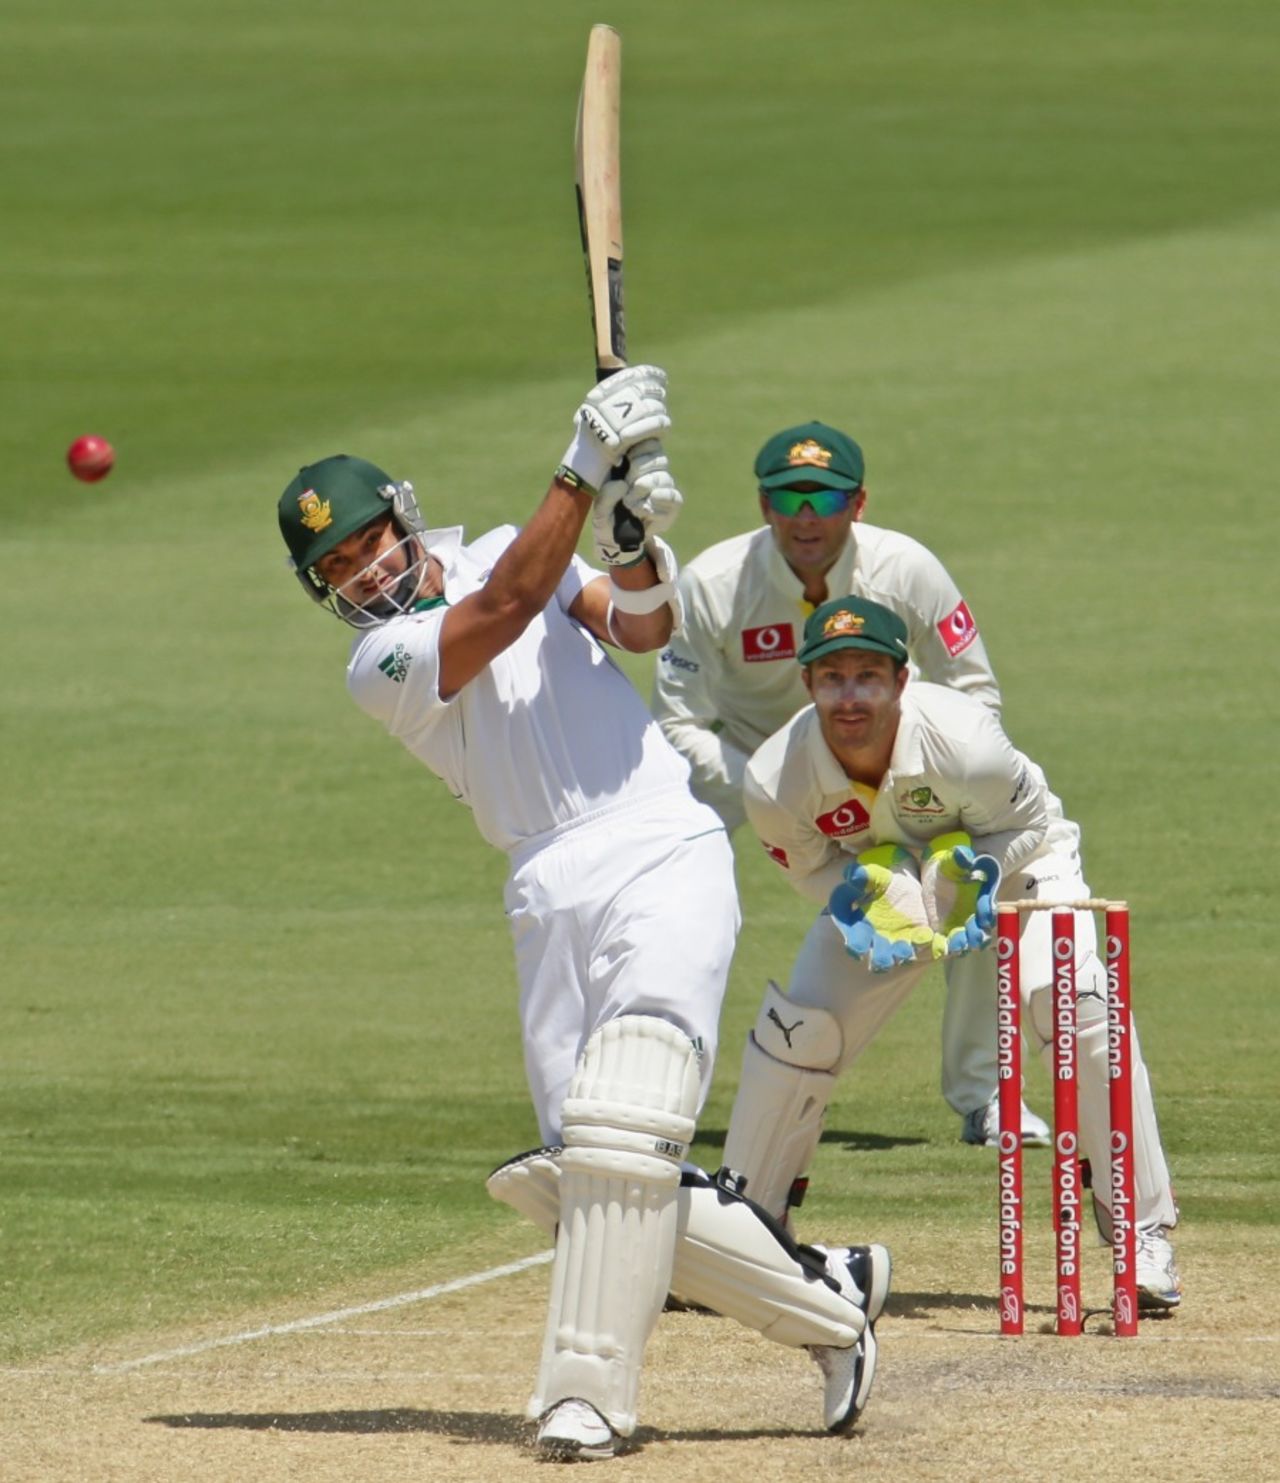 Alviro Petersen drives in the air down the ground, Australia v South Africa, 2nd Test, Adelaide, 2nd day, November 23, 2012